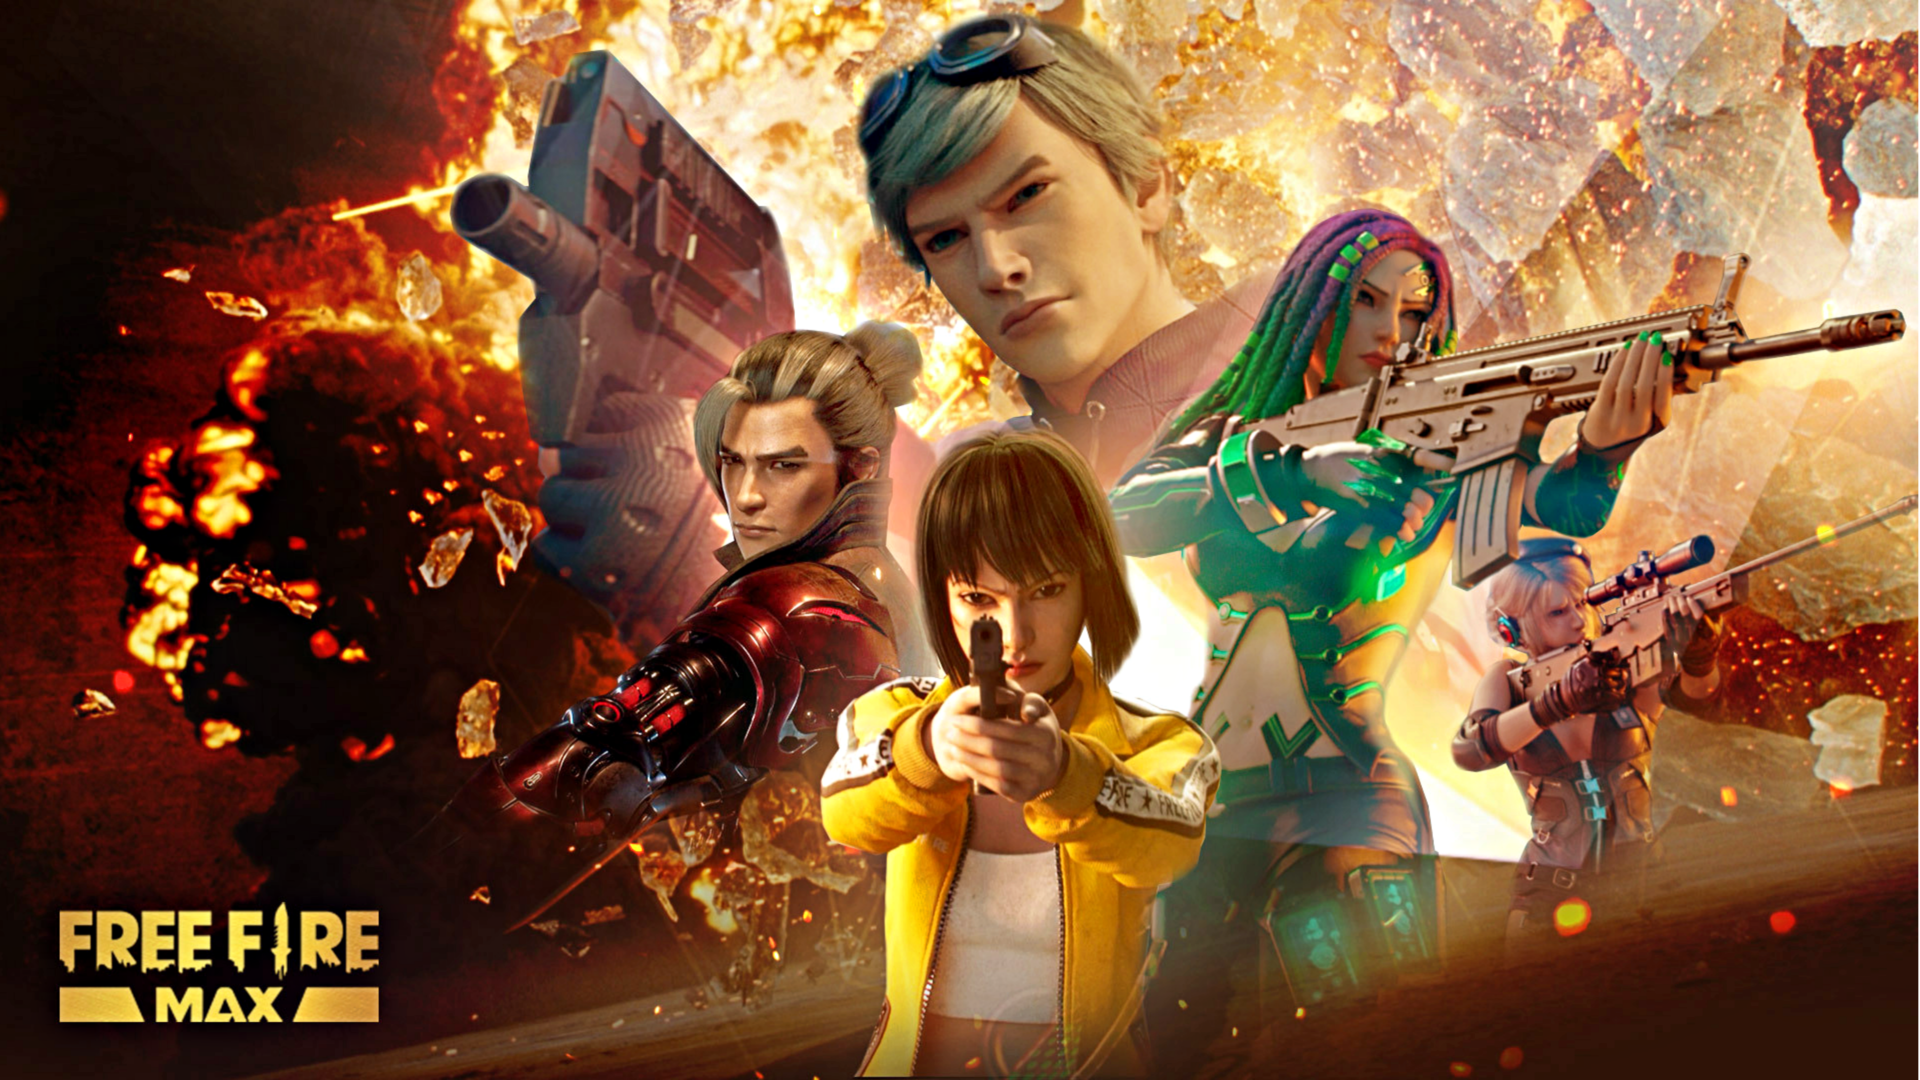 How to redeem Free Fire MAX codes for February 19